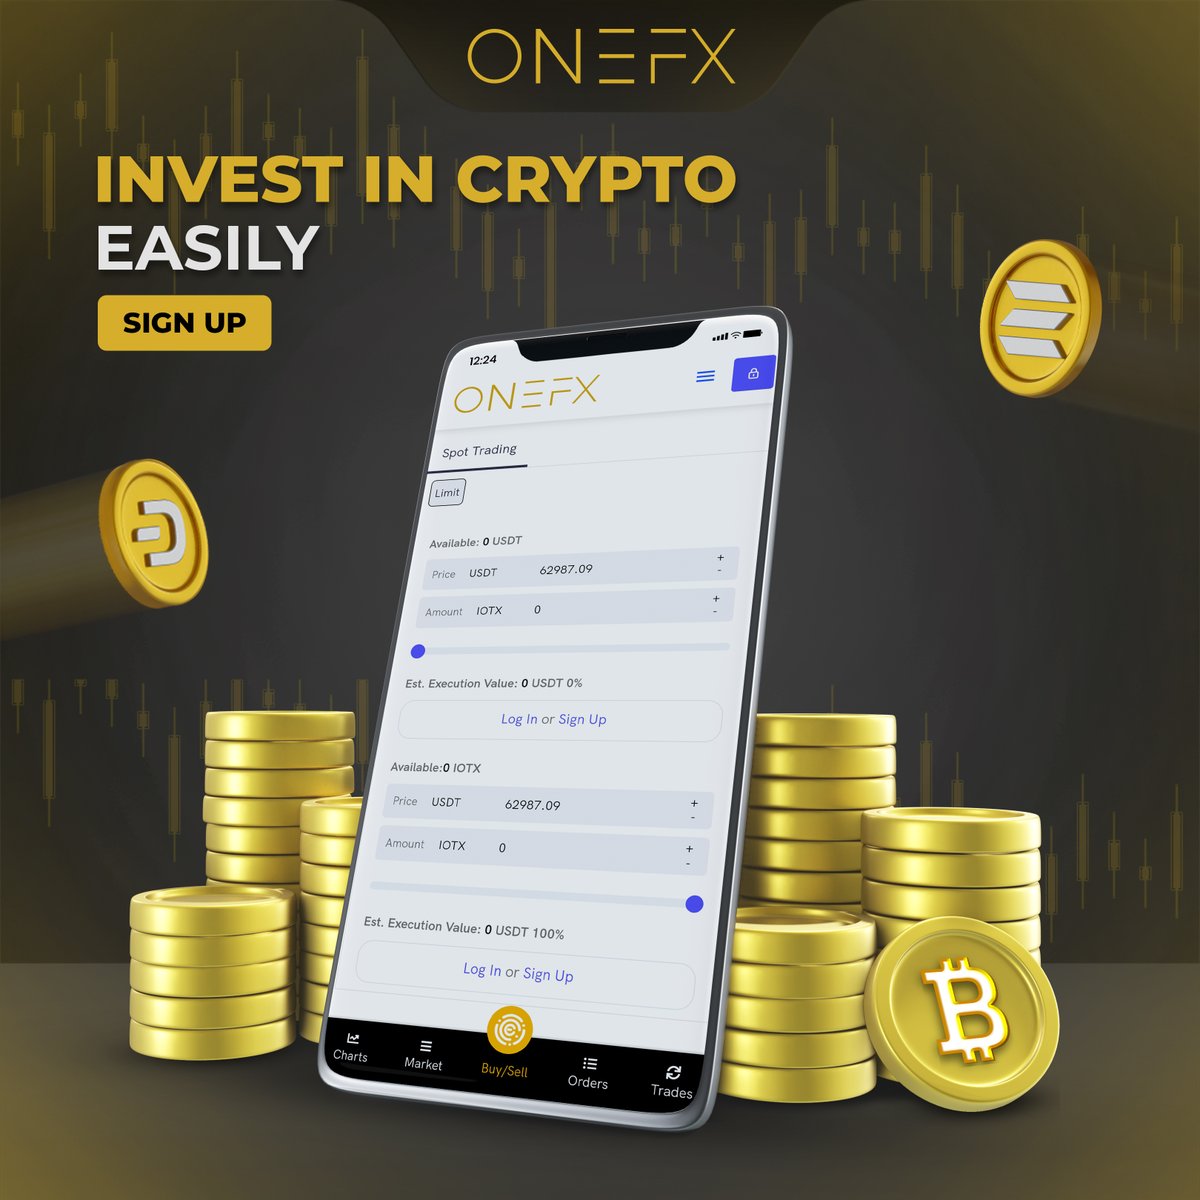 Ready to dive into the world of crypto?🚀

Invest easily with ONEFX! Sign up now and start your journey to financial freedom!💰

#cryptoinvesting #onefx #signupnow #cryptotrading #ridethewaves #securecrypto #buyandsell #registernow #cryptoadventure #cryptonews #newtrading